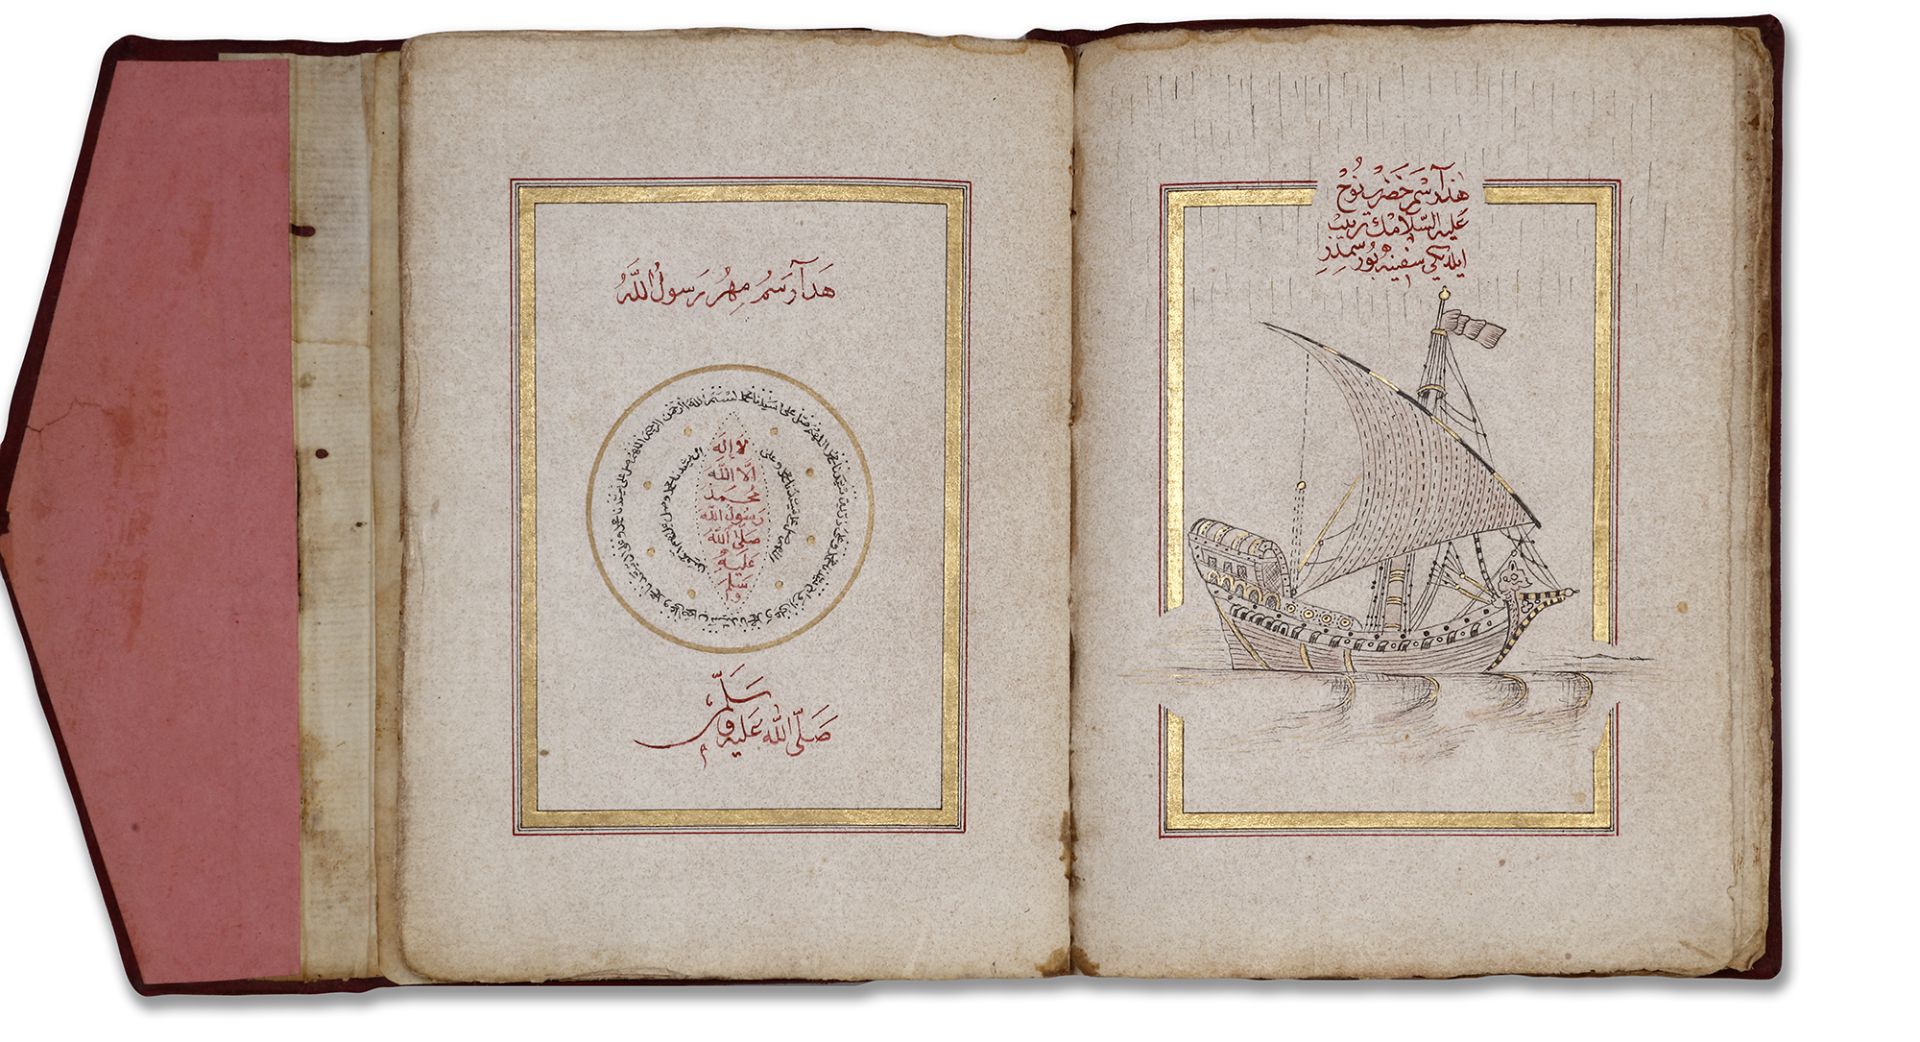 AN OTTOMAN COMPILATION OF PRAYERS AND HOLY PLACES BY ABD AL-QADIR HUSRI, OTTOMAN TURKEY, DATED 1181 - Image 2 of 12